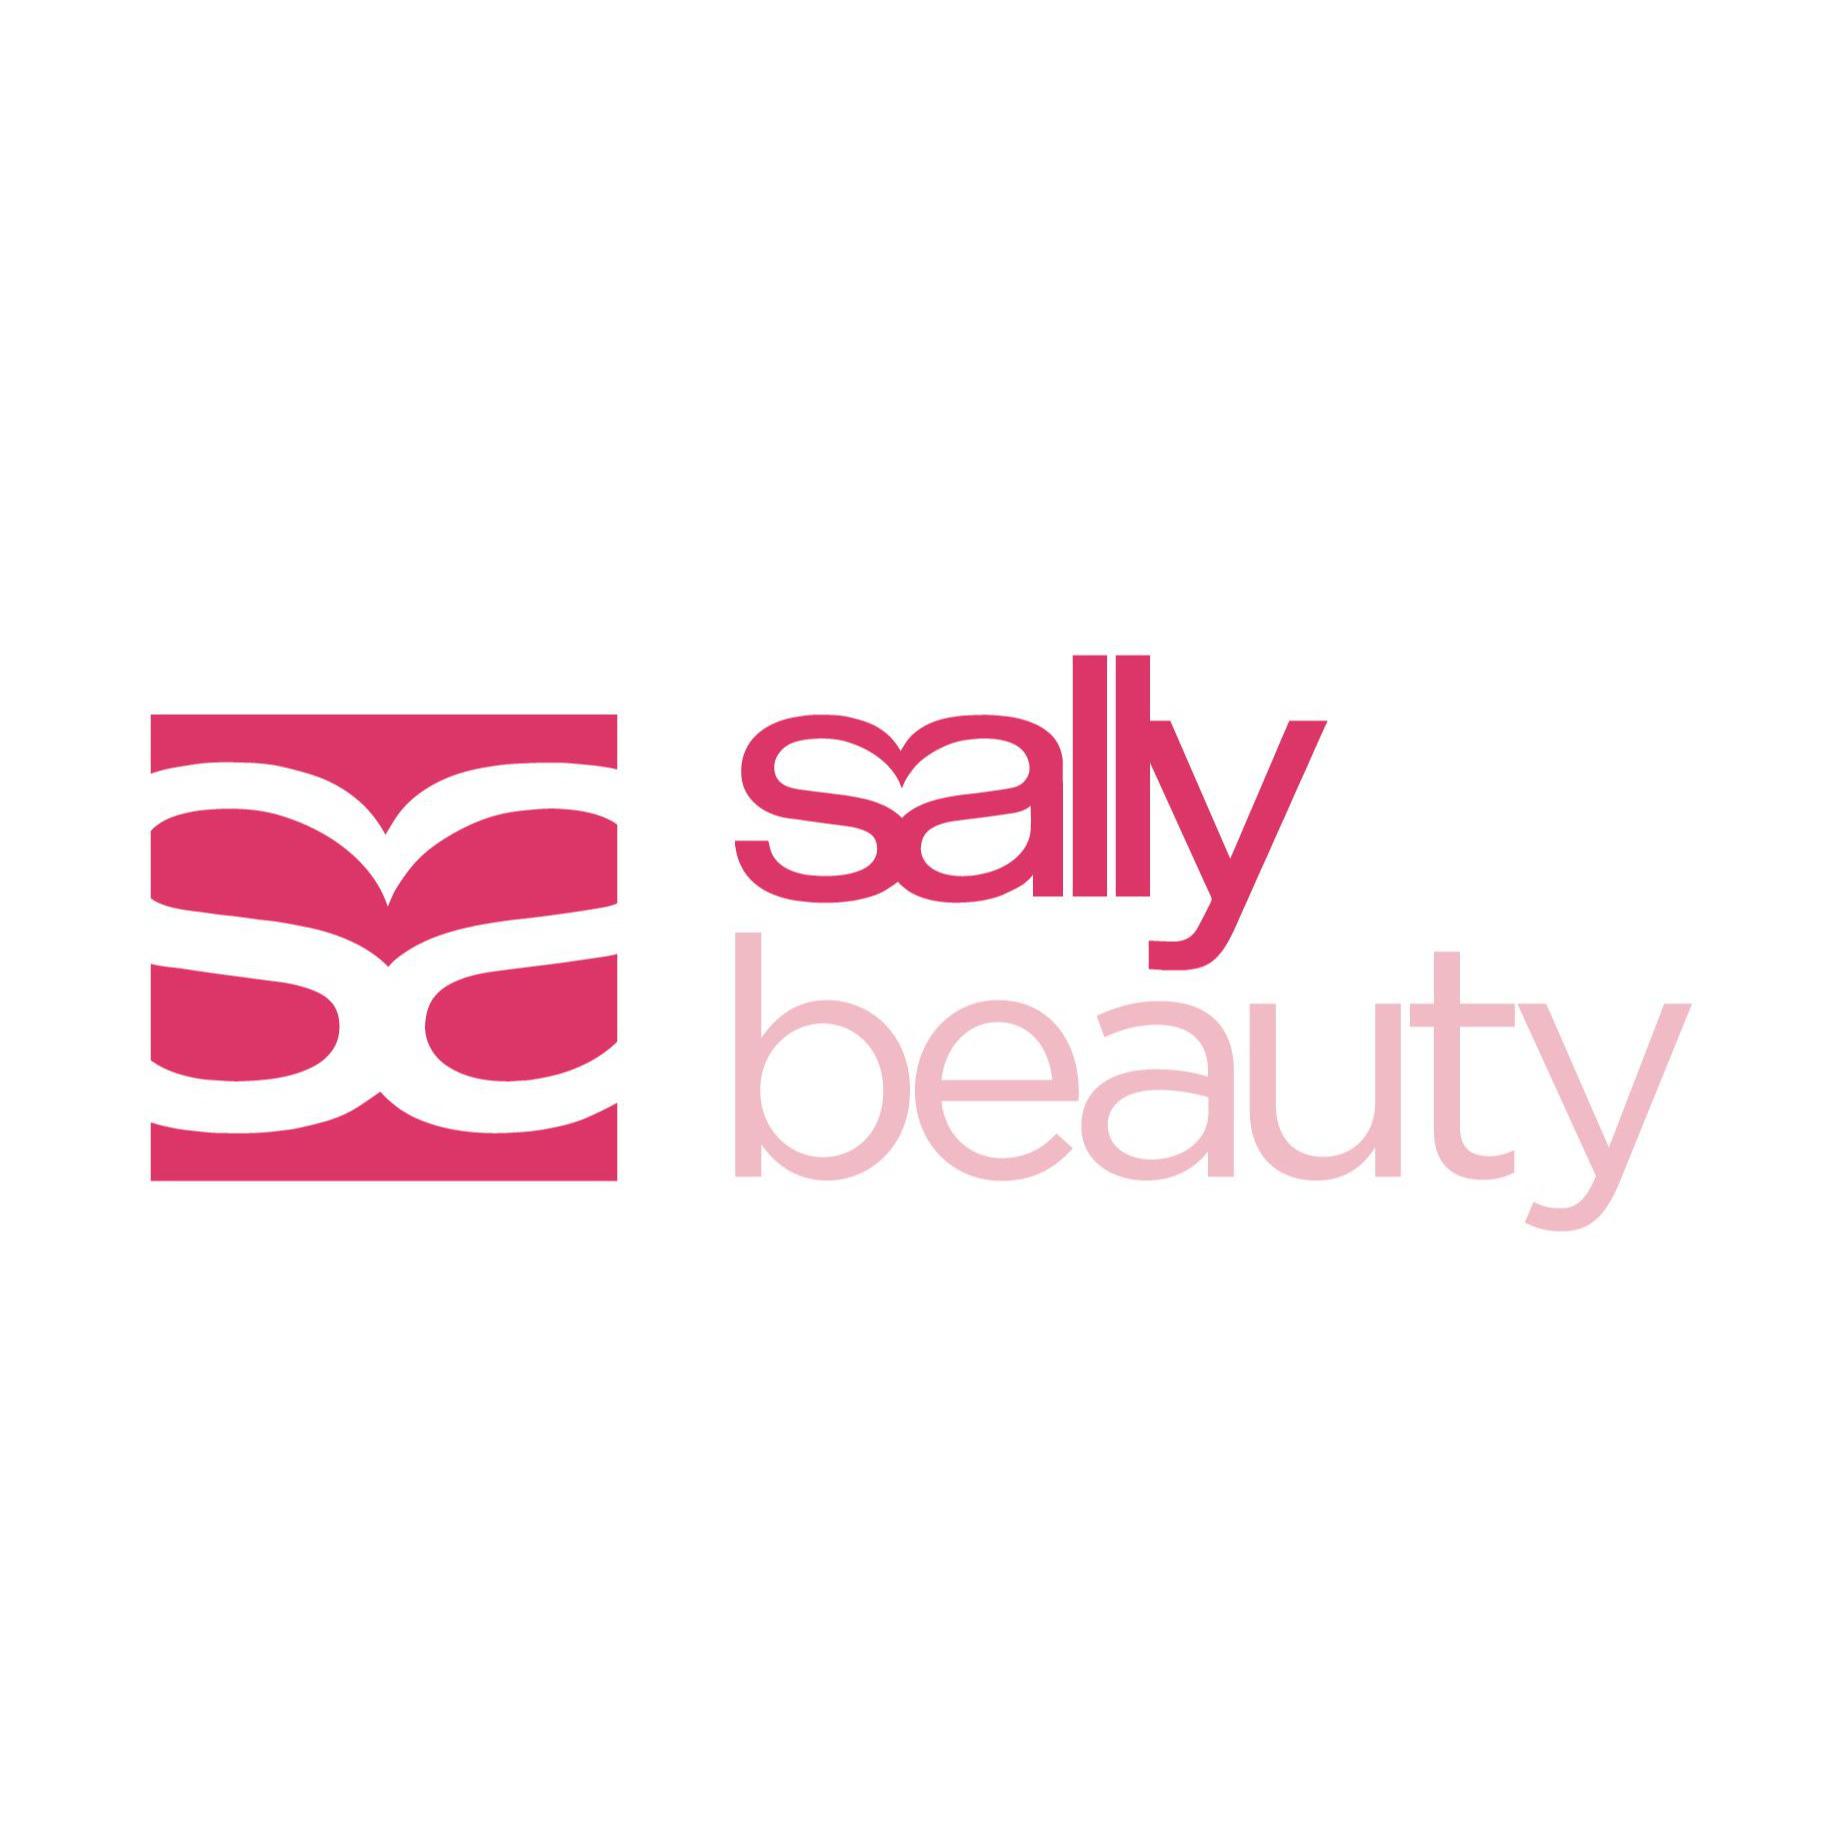 Sally Beauty - Middlesbrough, North Yorkshire TS1 5JW - 01642 243608 | ShowMeLocal.com